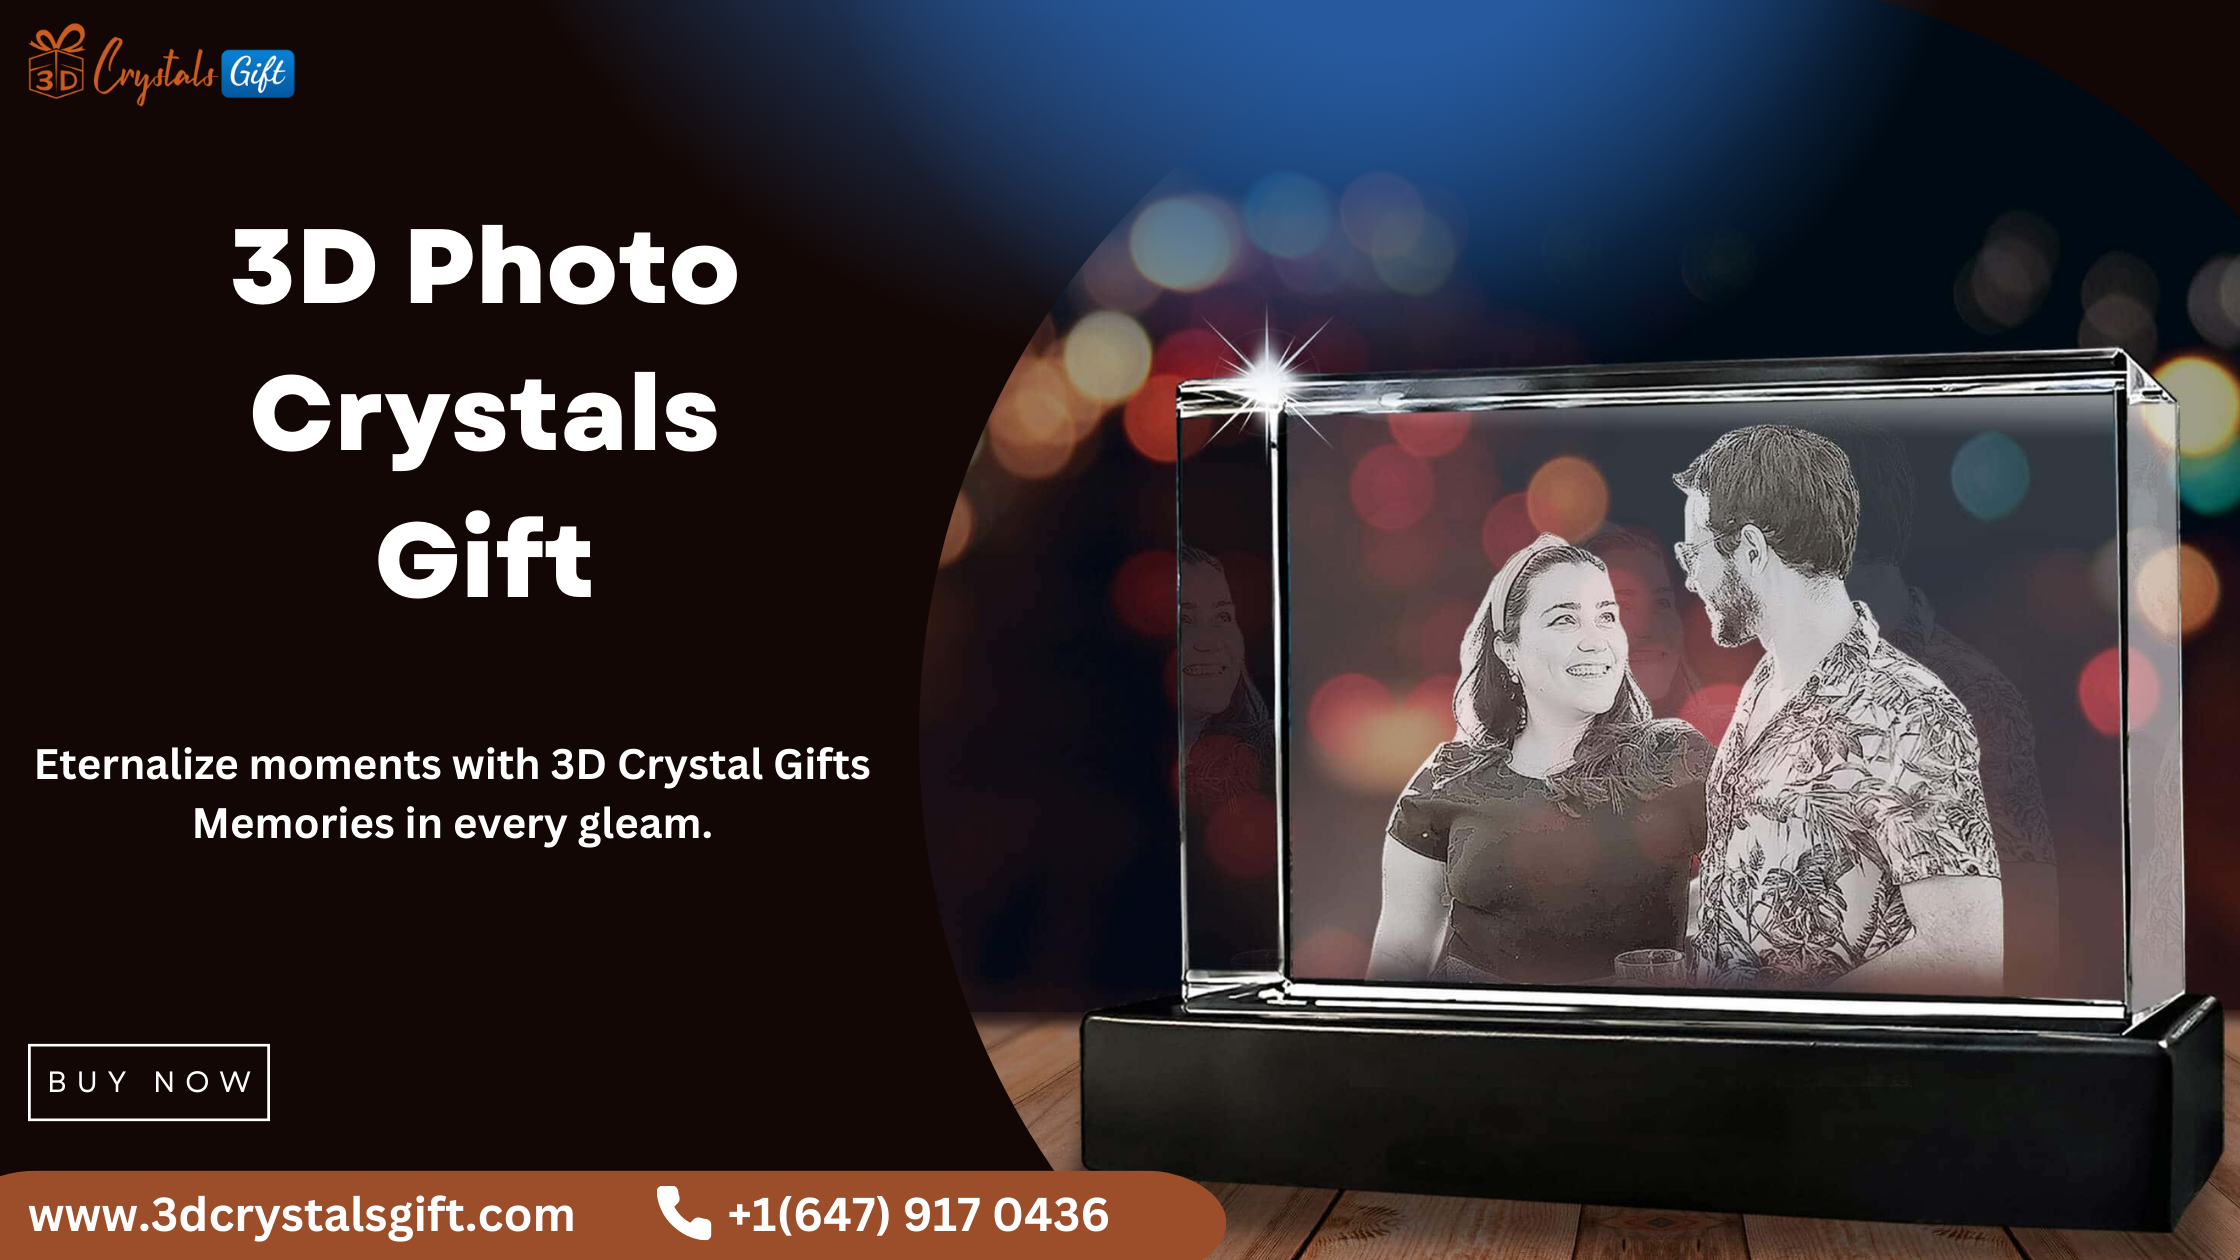 3D Photo Crystals Gift